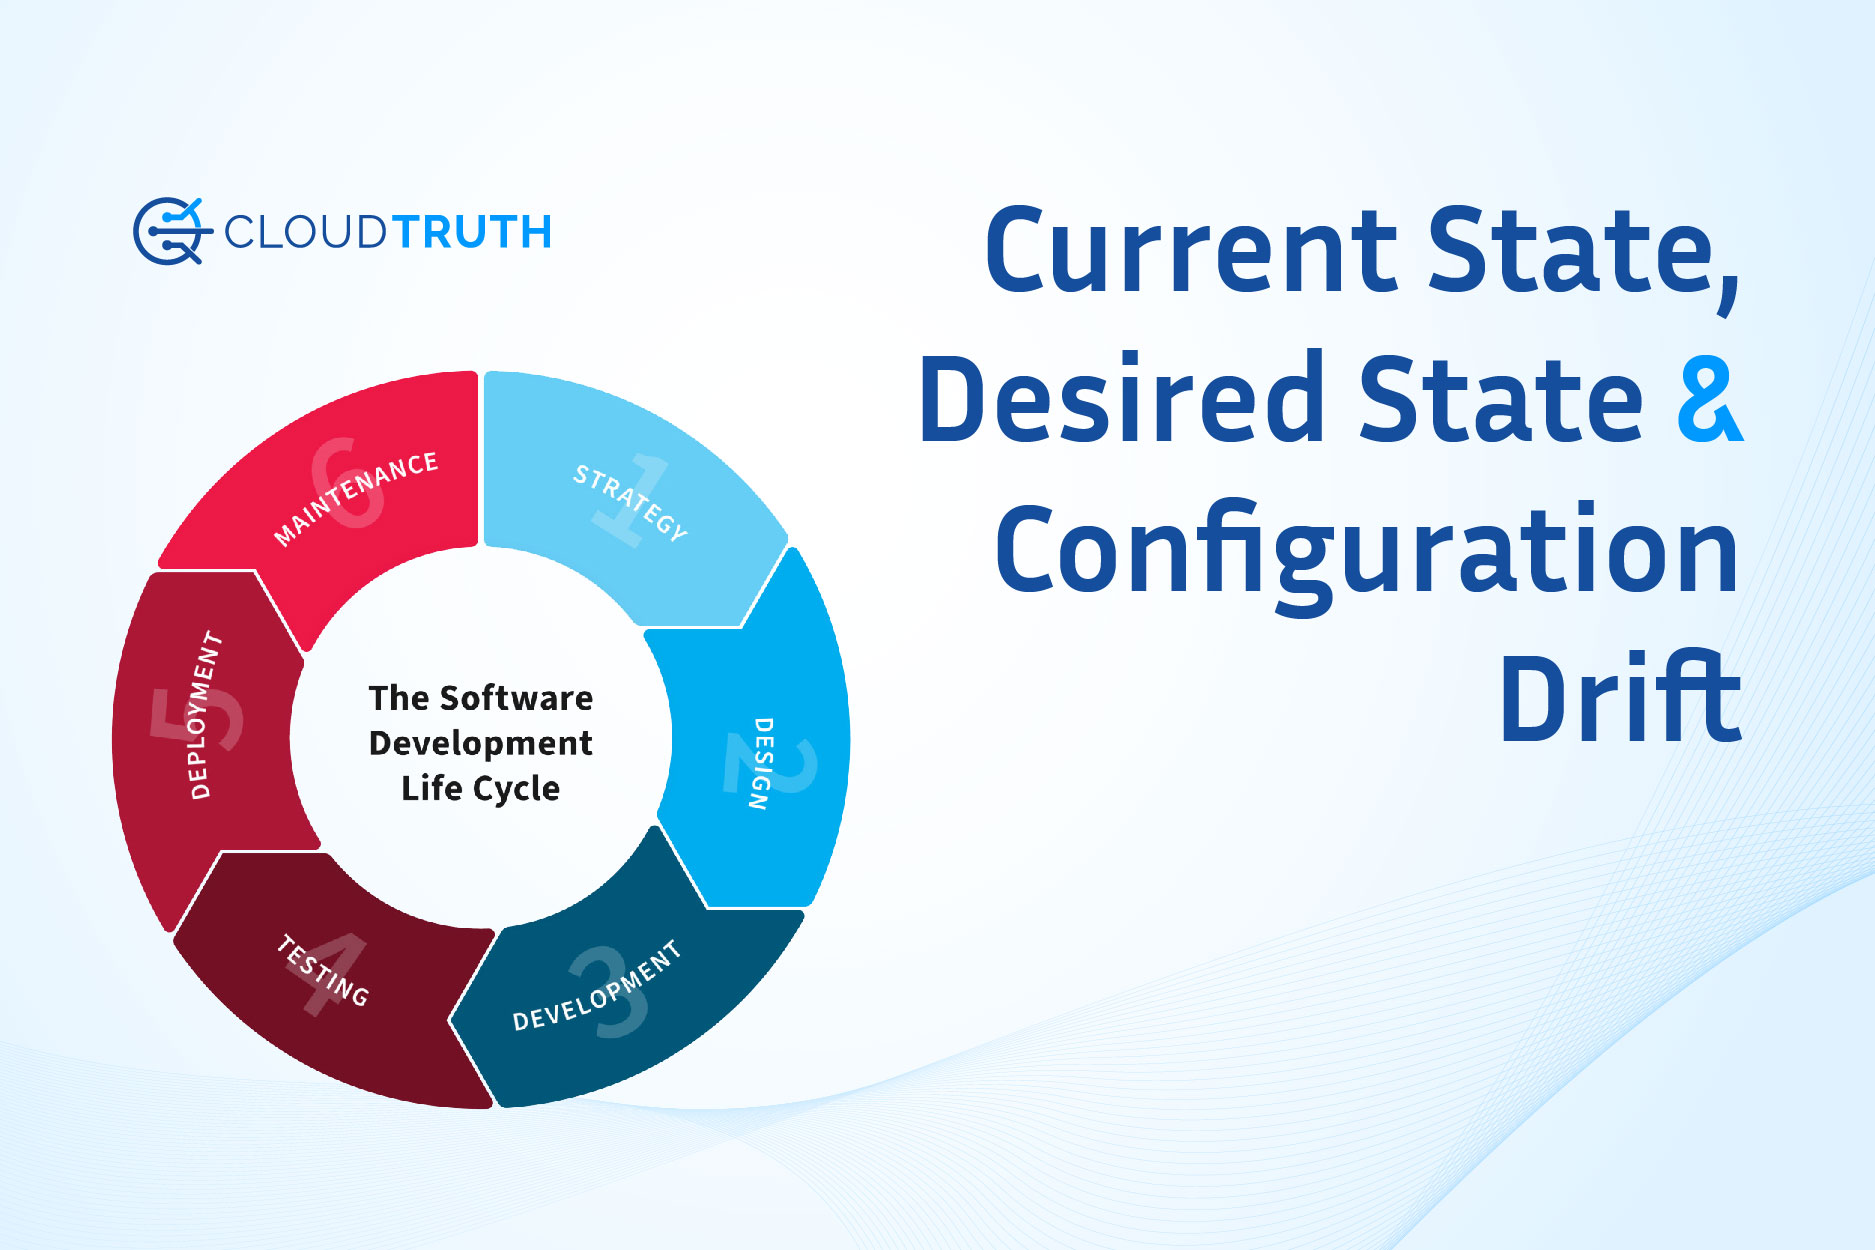 SDLC Deployment Phase and Current State